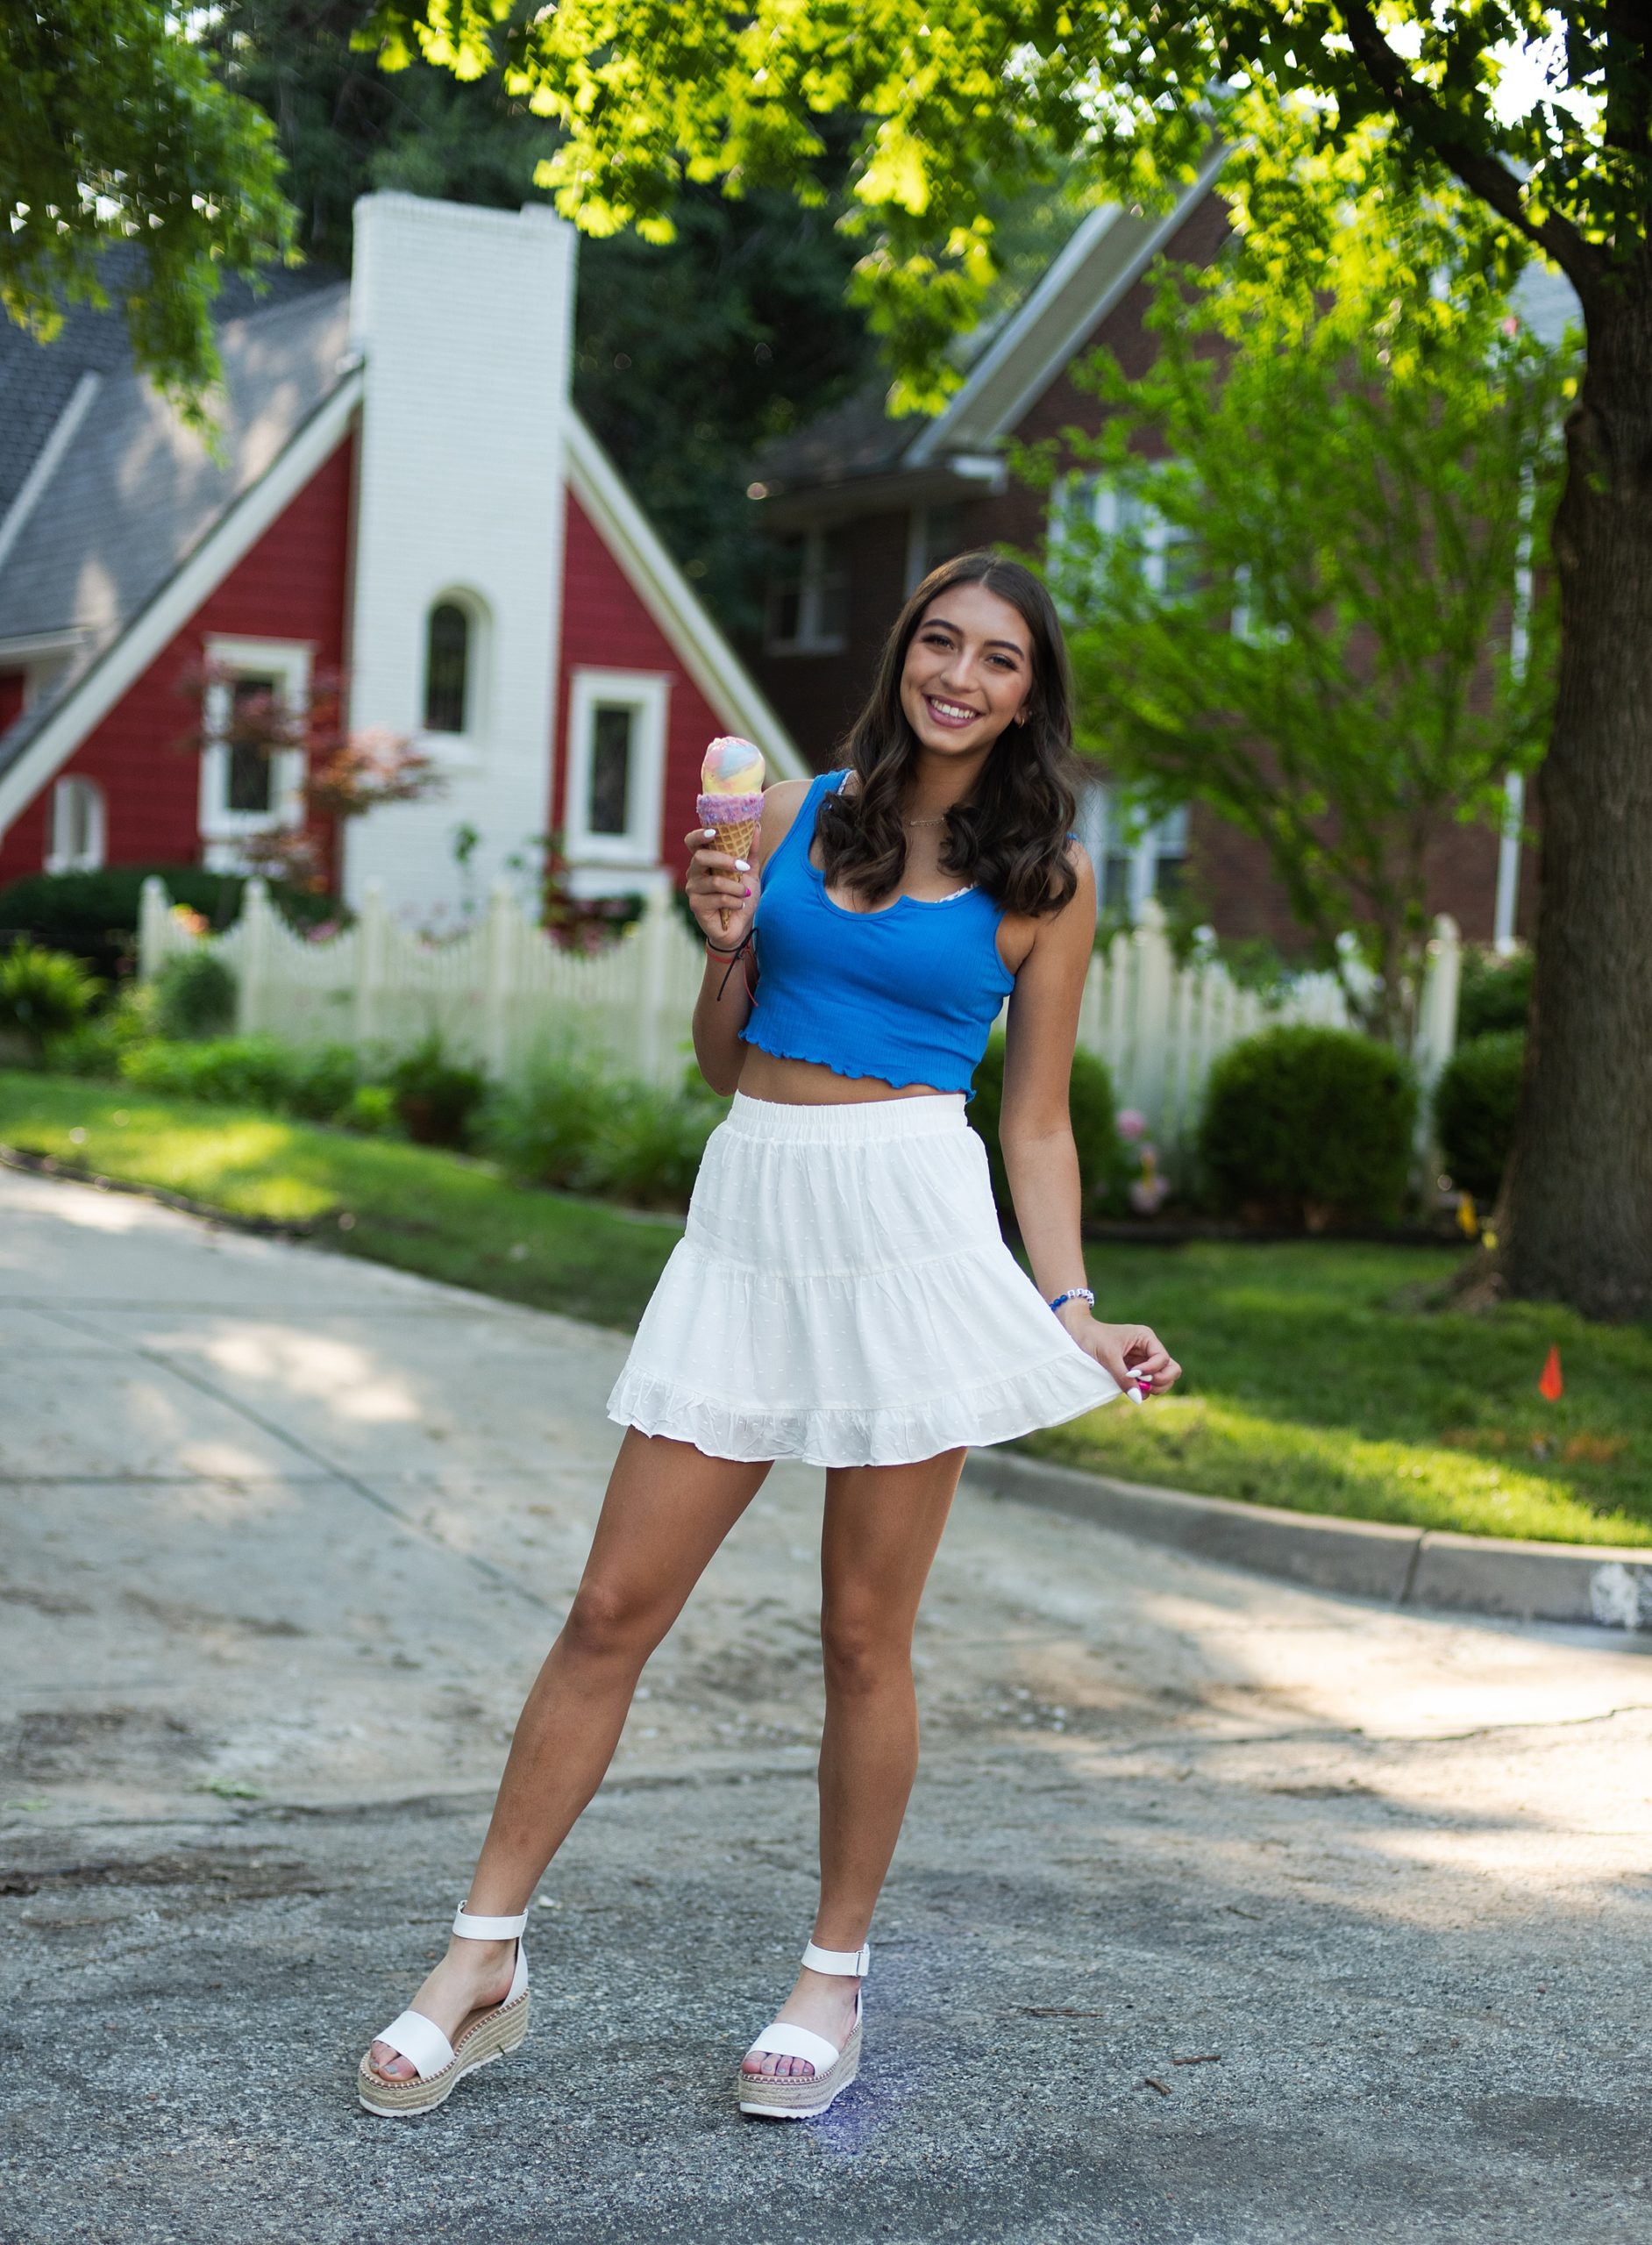 high school senior in front of red house in blue top and white skirt holding ice cream cone senior pictures